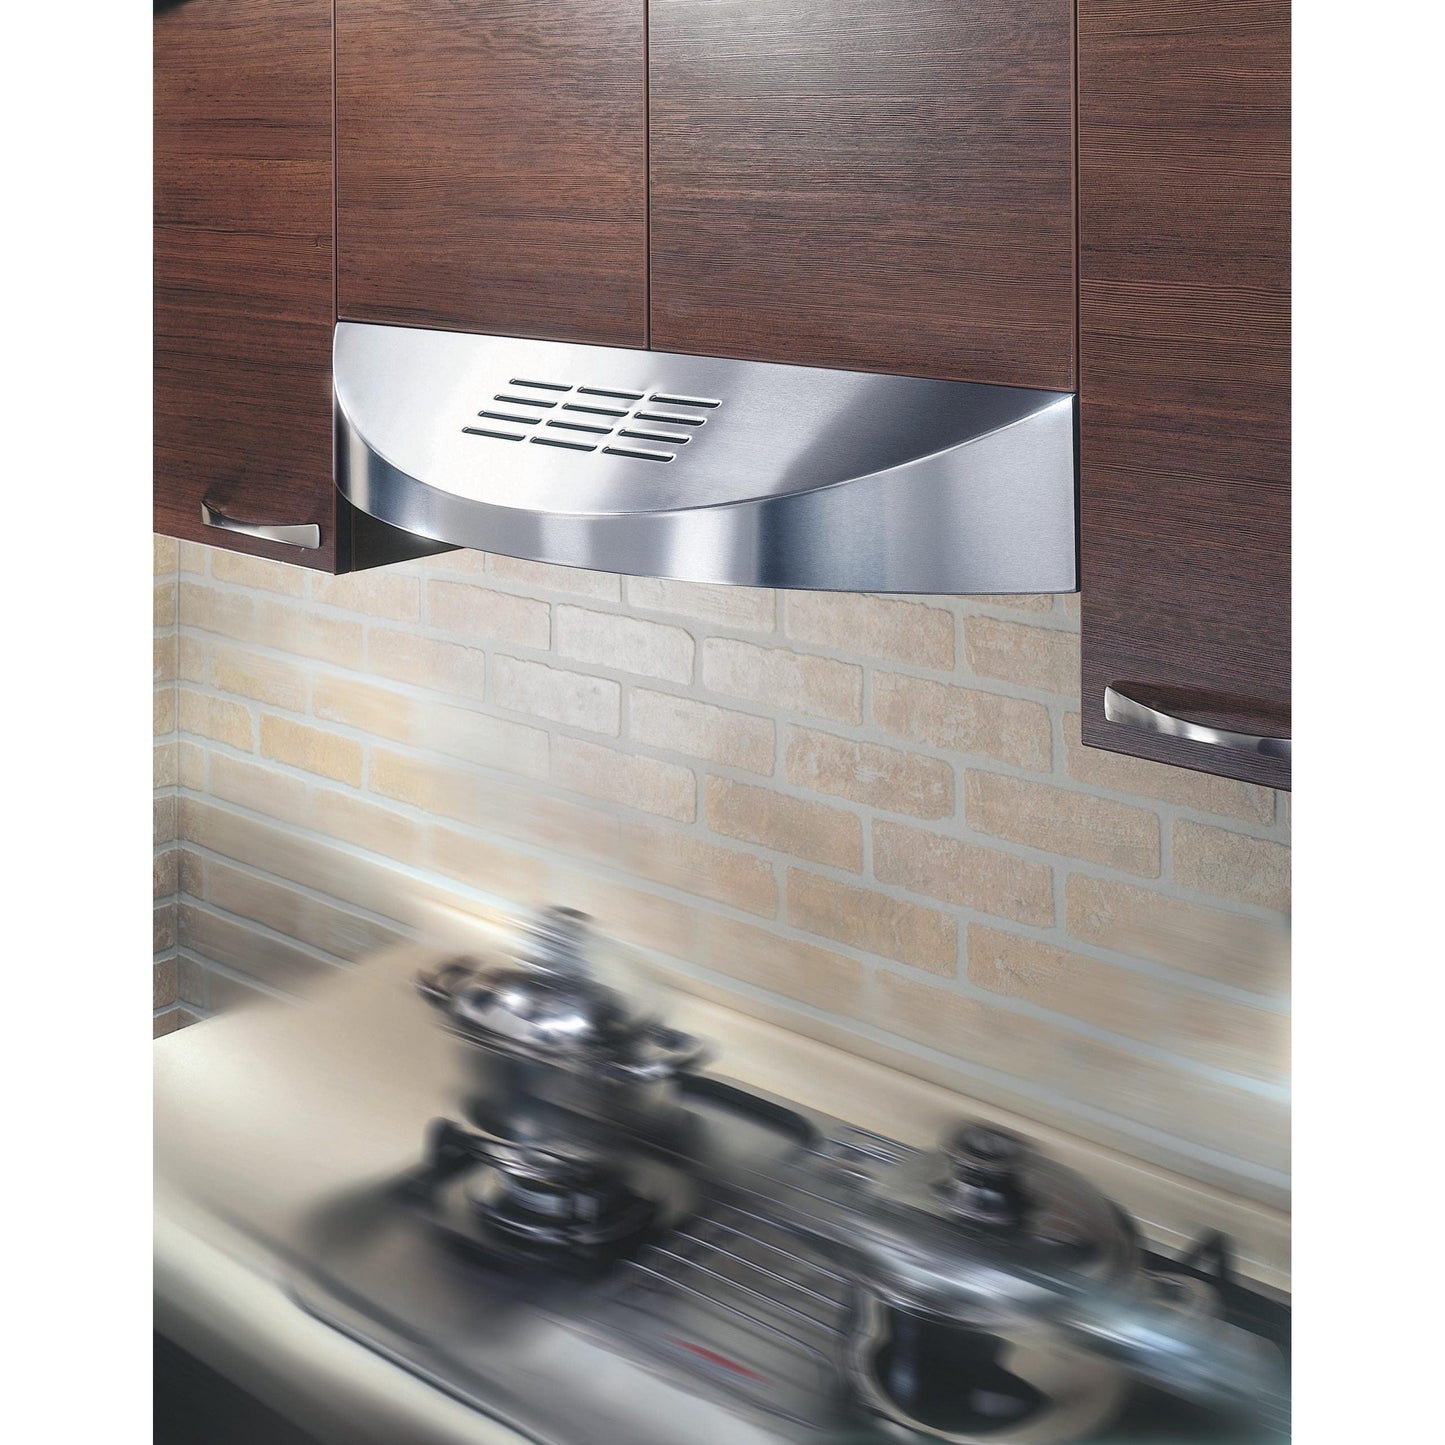 KOBE Brillia CHX38 SQBD-3 Series 36" Ductless Under Cabinet Range Hood With 400 CFM Internal Blower, 3-Speed Mechanical Push Button, Dishwasher-Safe Baffle Filters, Charcoal Filters, and LED Lights